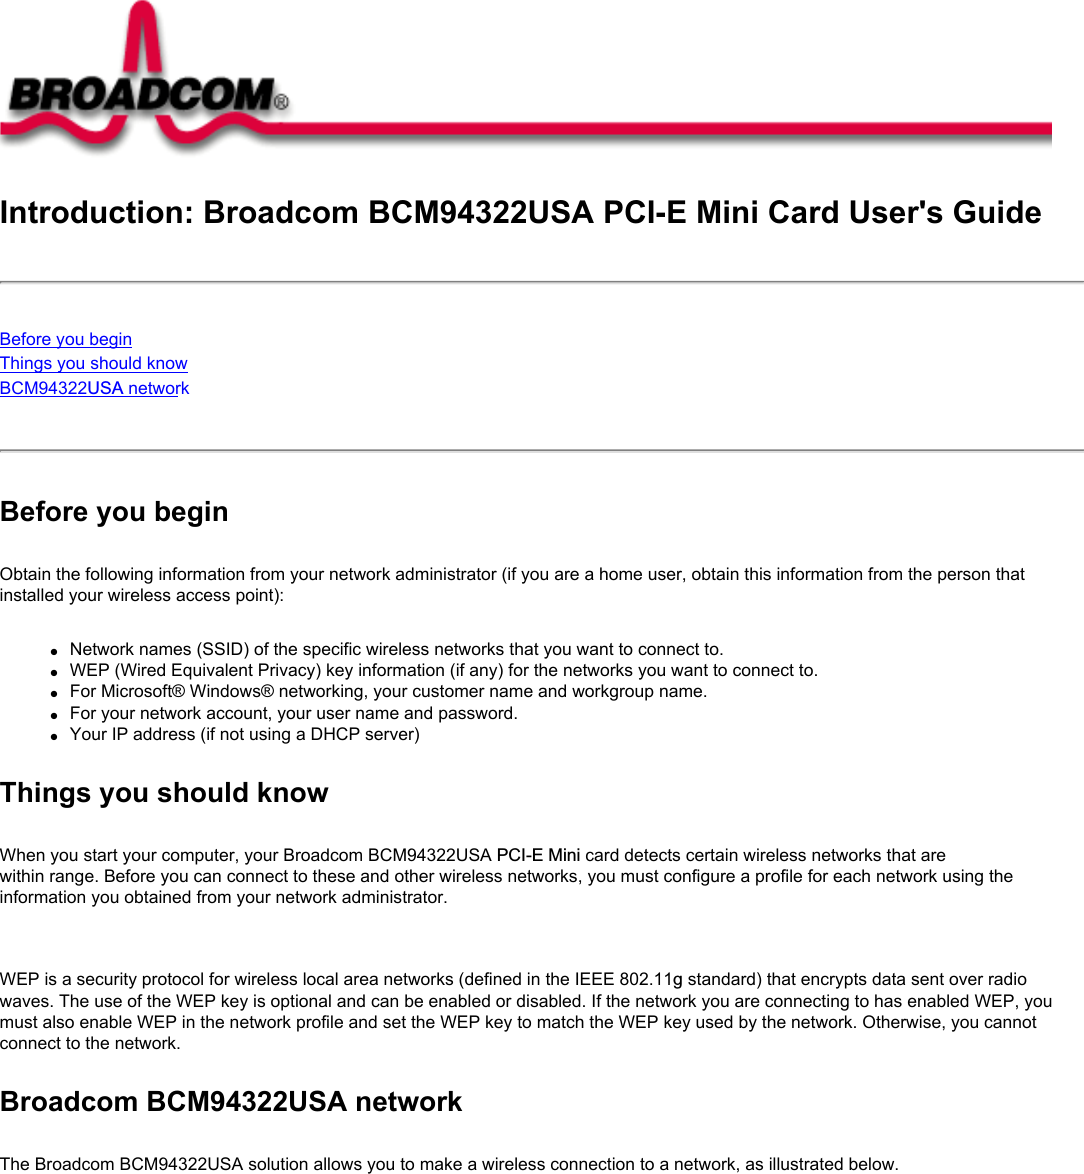 Introduction: Broadcom BCM94322USA PCI-E Mini Card User&apos;s GuideBefore you beginThings you should knowBCM94322USA network Before you beginObtain the following information from your network administrator (if you are a home user, obtain this information from the person that installed your wireless access point):●     Network names (SSID) of the specific wireless networks that you want to connect to.●     WEP (Wired Equivalent Privacy) key information (if any) for the networks you want to connect to.●     For Microsoft® Windows® networking, your customer name and workgroup name.●     For your network account, your user name and password.●     Your IP address (if not using a DHCP server)Things you should knowWhen you start your computer, your Broadcom BCM94322USA PCI-E Mini card detects certain wireless networks that are within range. Before you can connect to these and other wireless networks, you must configure a profile for each network using the information you obtained from your network administrator.   WEP is a security protocol for wireless local area networks (defined in the IEEE 802.11g standard) that encrypts data sent over radio waves. The use of the WEP key is optional and can be enabled or disabled. If the network you are connecting to has enabled WEP, you must also enable WEP in the network profile and set the WEP key to match the WEP key used by the network. Otherwise, you cannot connect to the network.Broadcom BCM94322USA networkThe Broadcom BCM94322USA solution allows you to make a wireless connection to a network, as illustrated below.